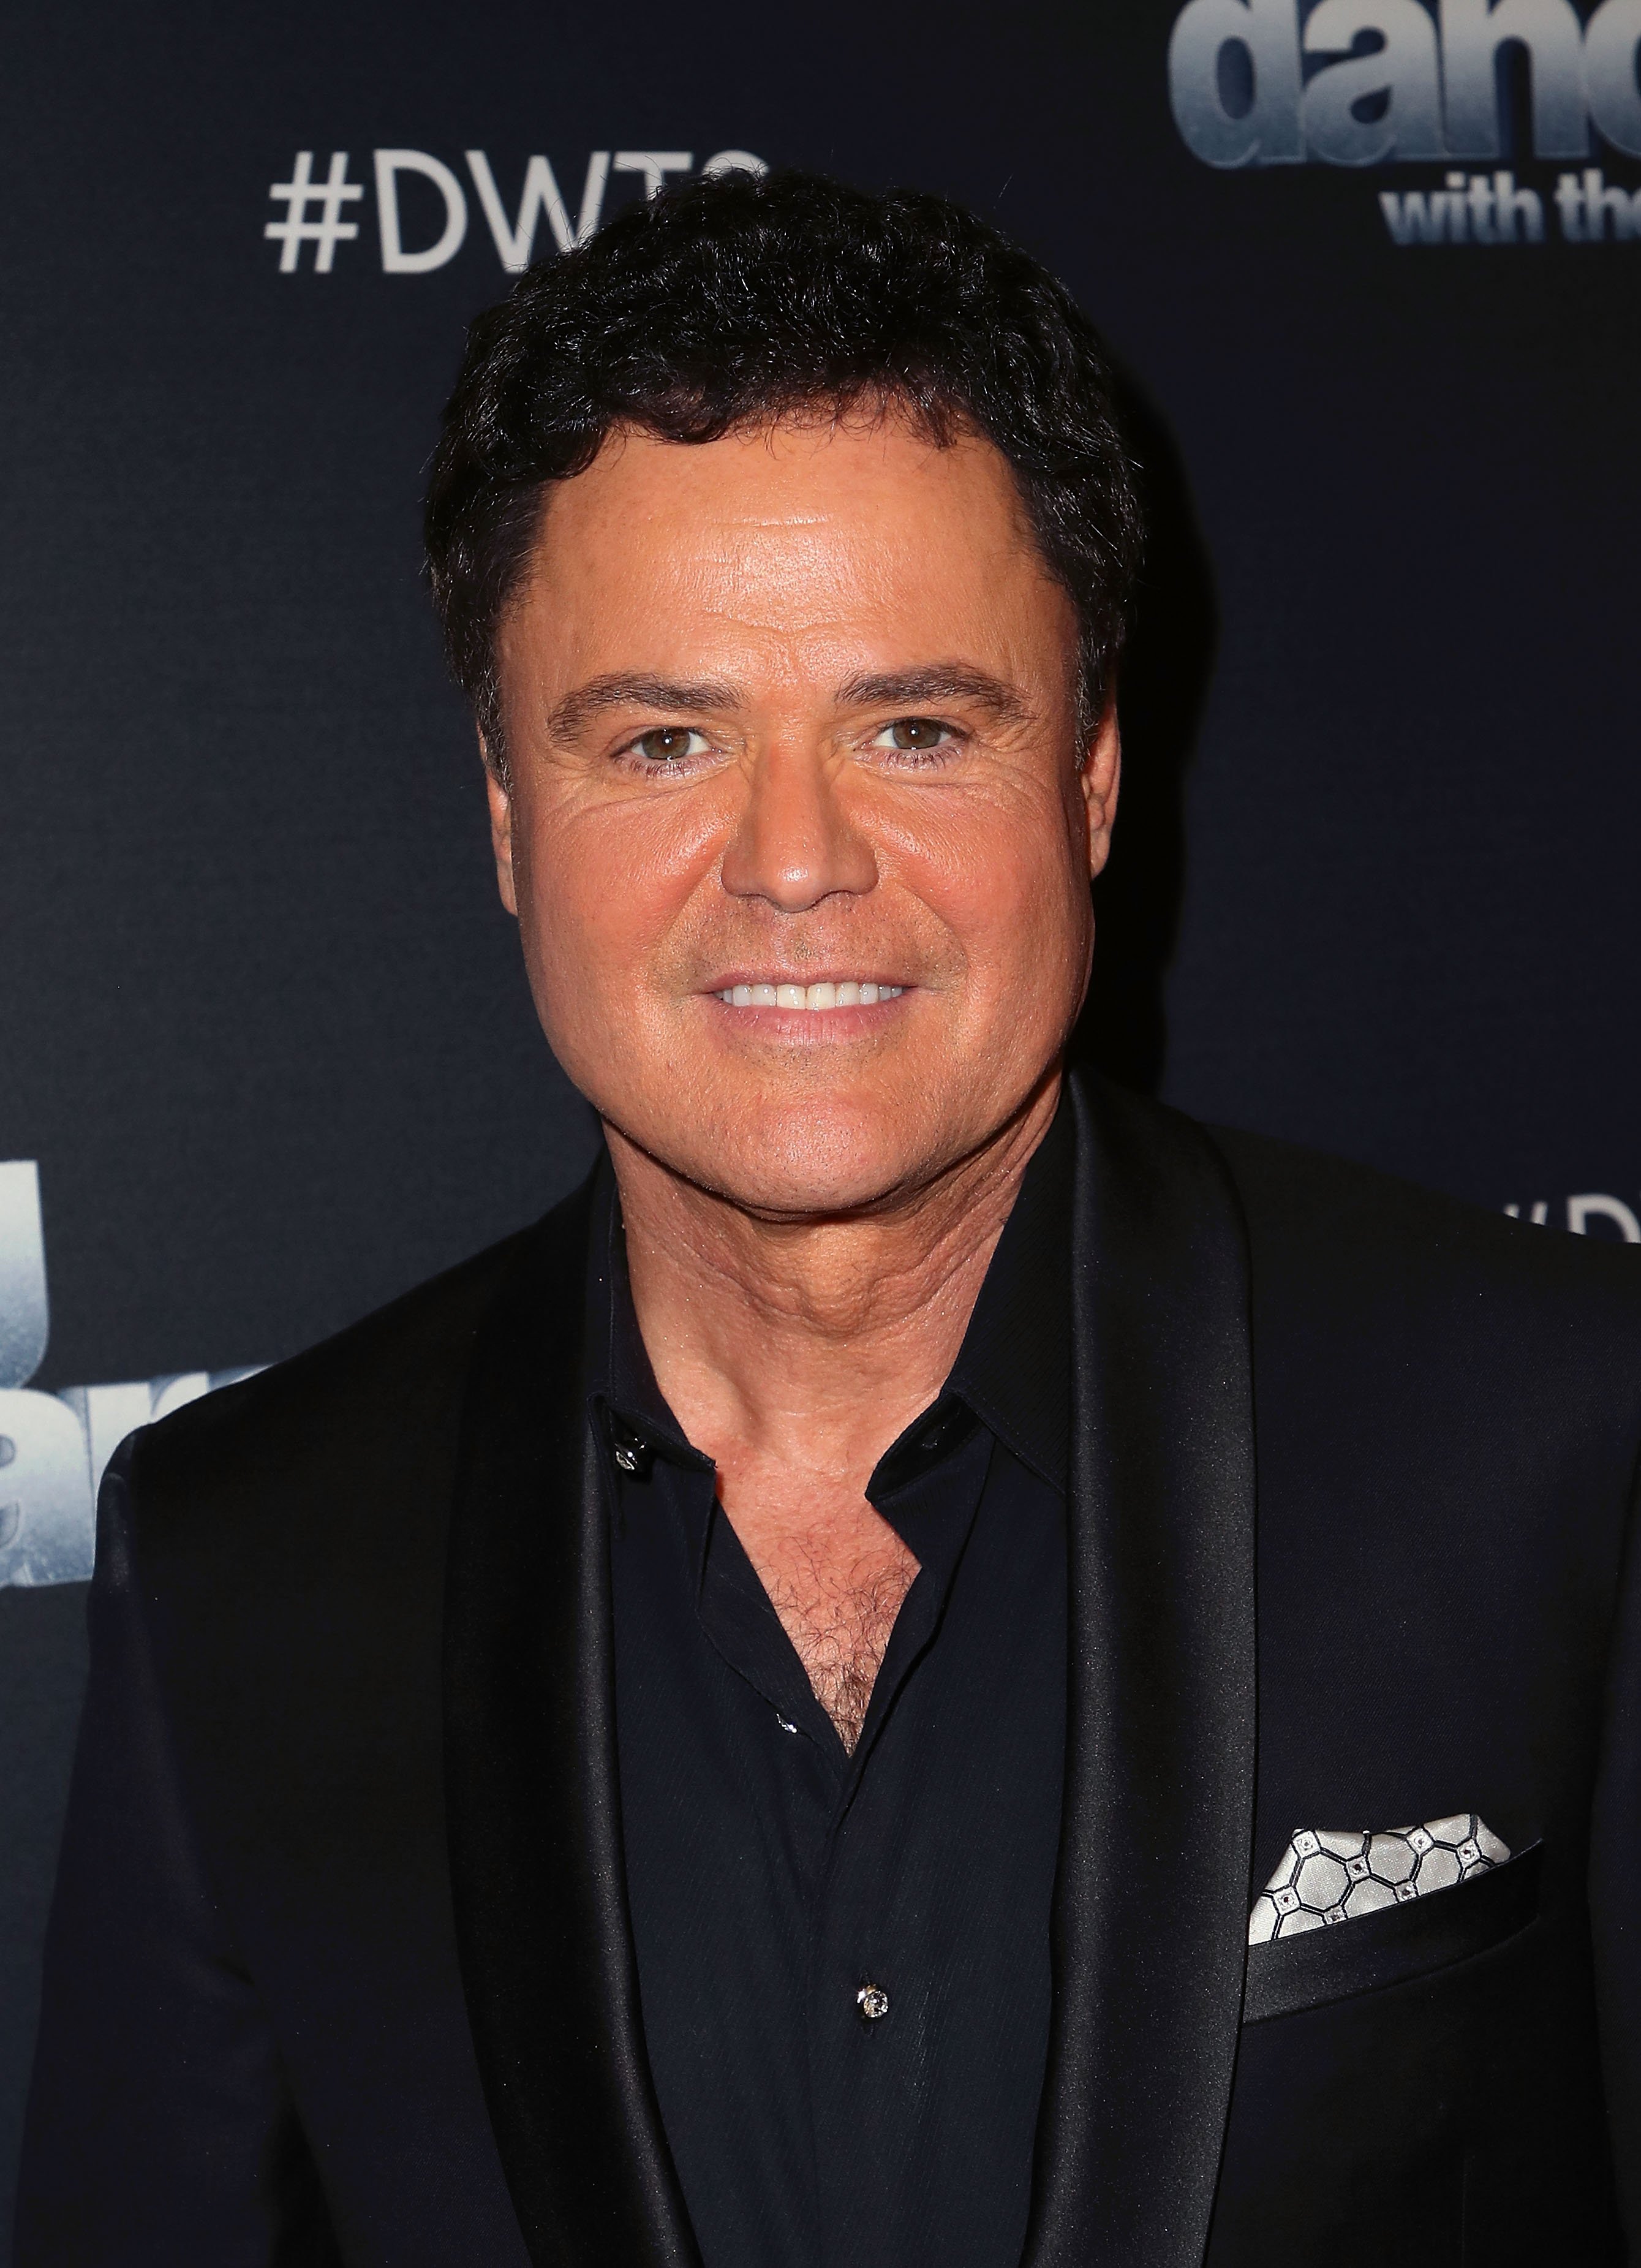 Donny Osmond poses at "Dancing with the Stars" Season 27 at CBS Television City on October 2, 2018 in Los Angeles, California. | Source: Getty Images